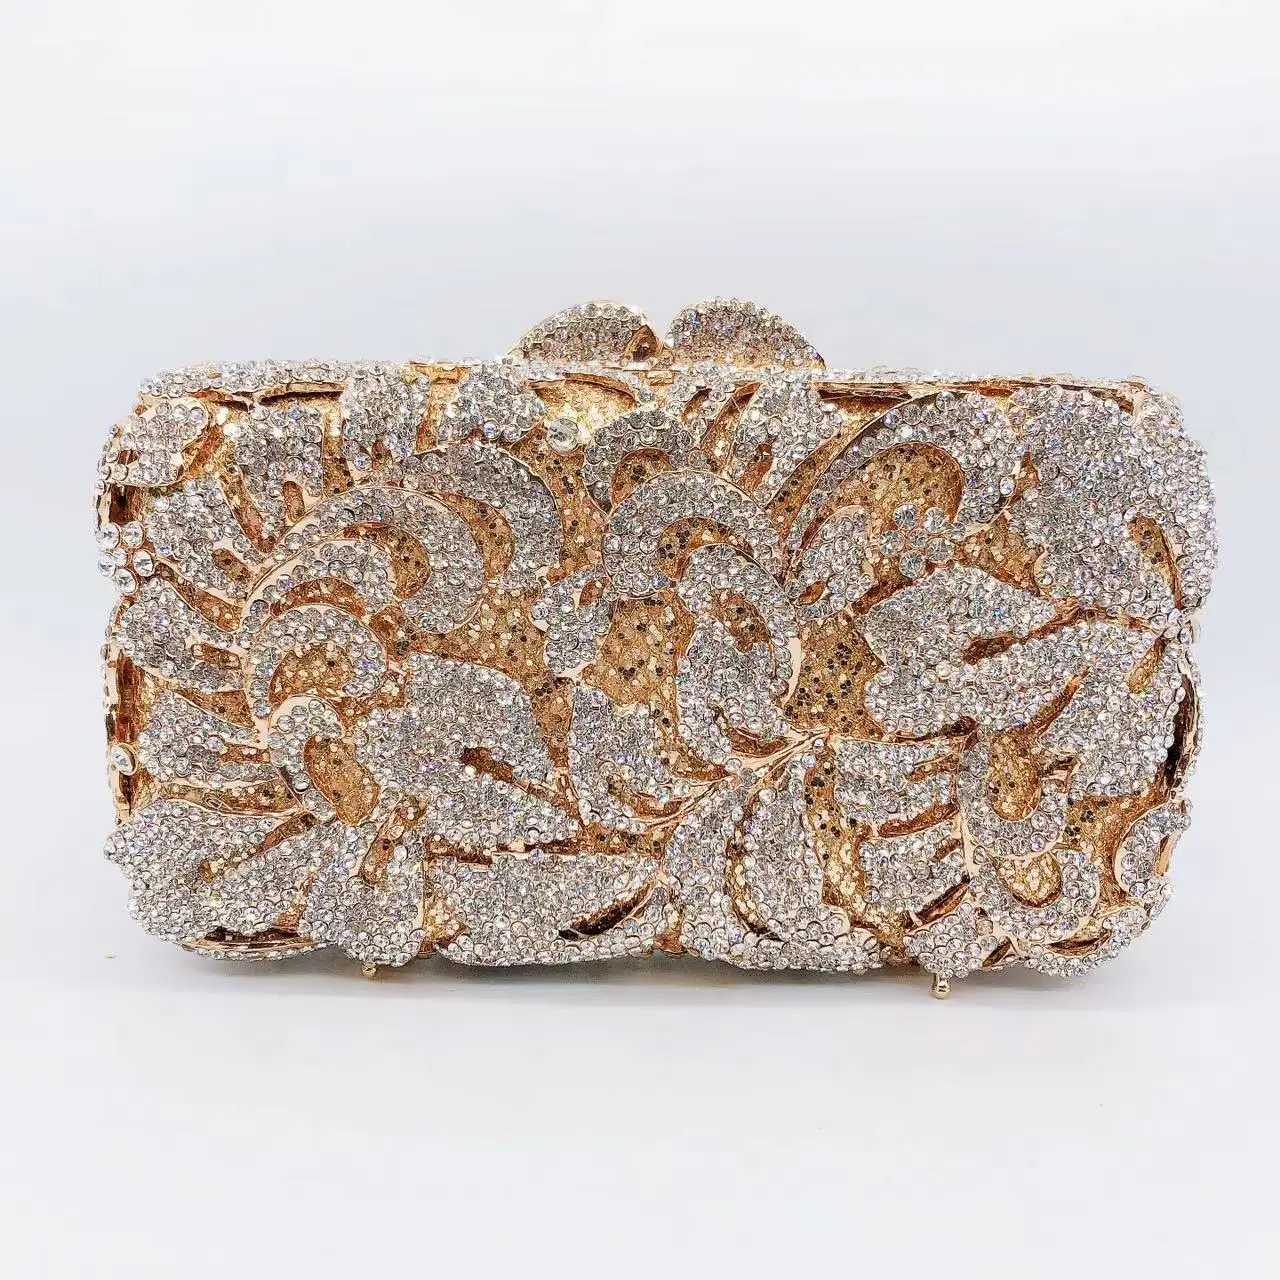 Amiqi MRY78 Luxury Blue Flower Hollow Out Crystal Metal Clutches Ladies Wedding Party Purse crystal stone evening bag